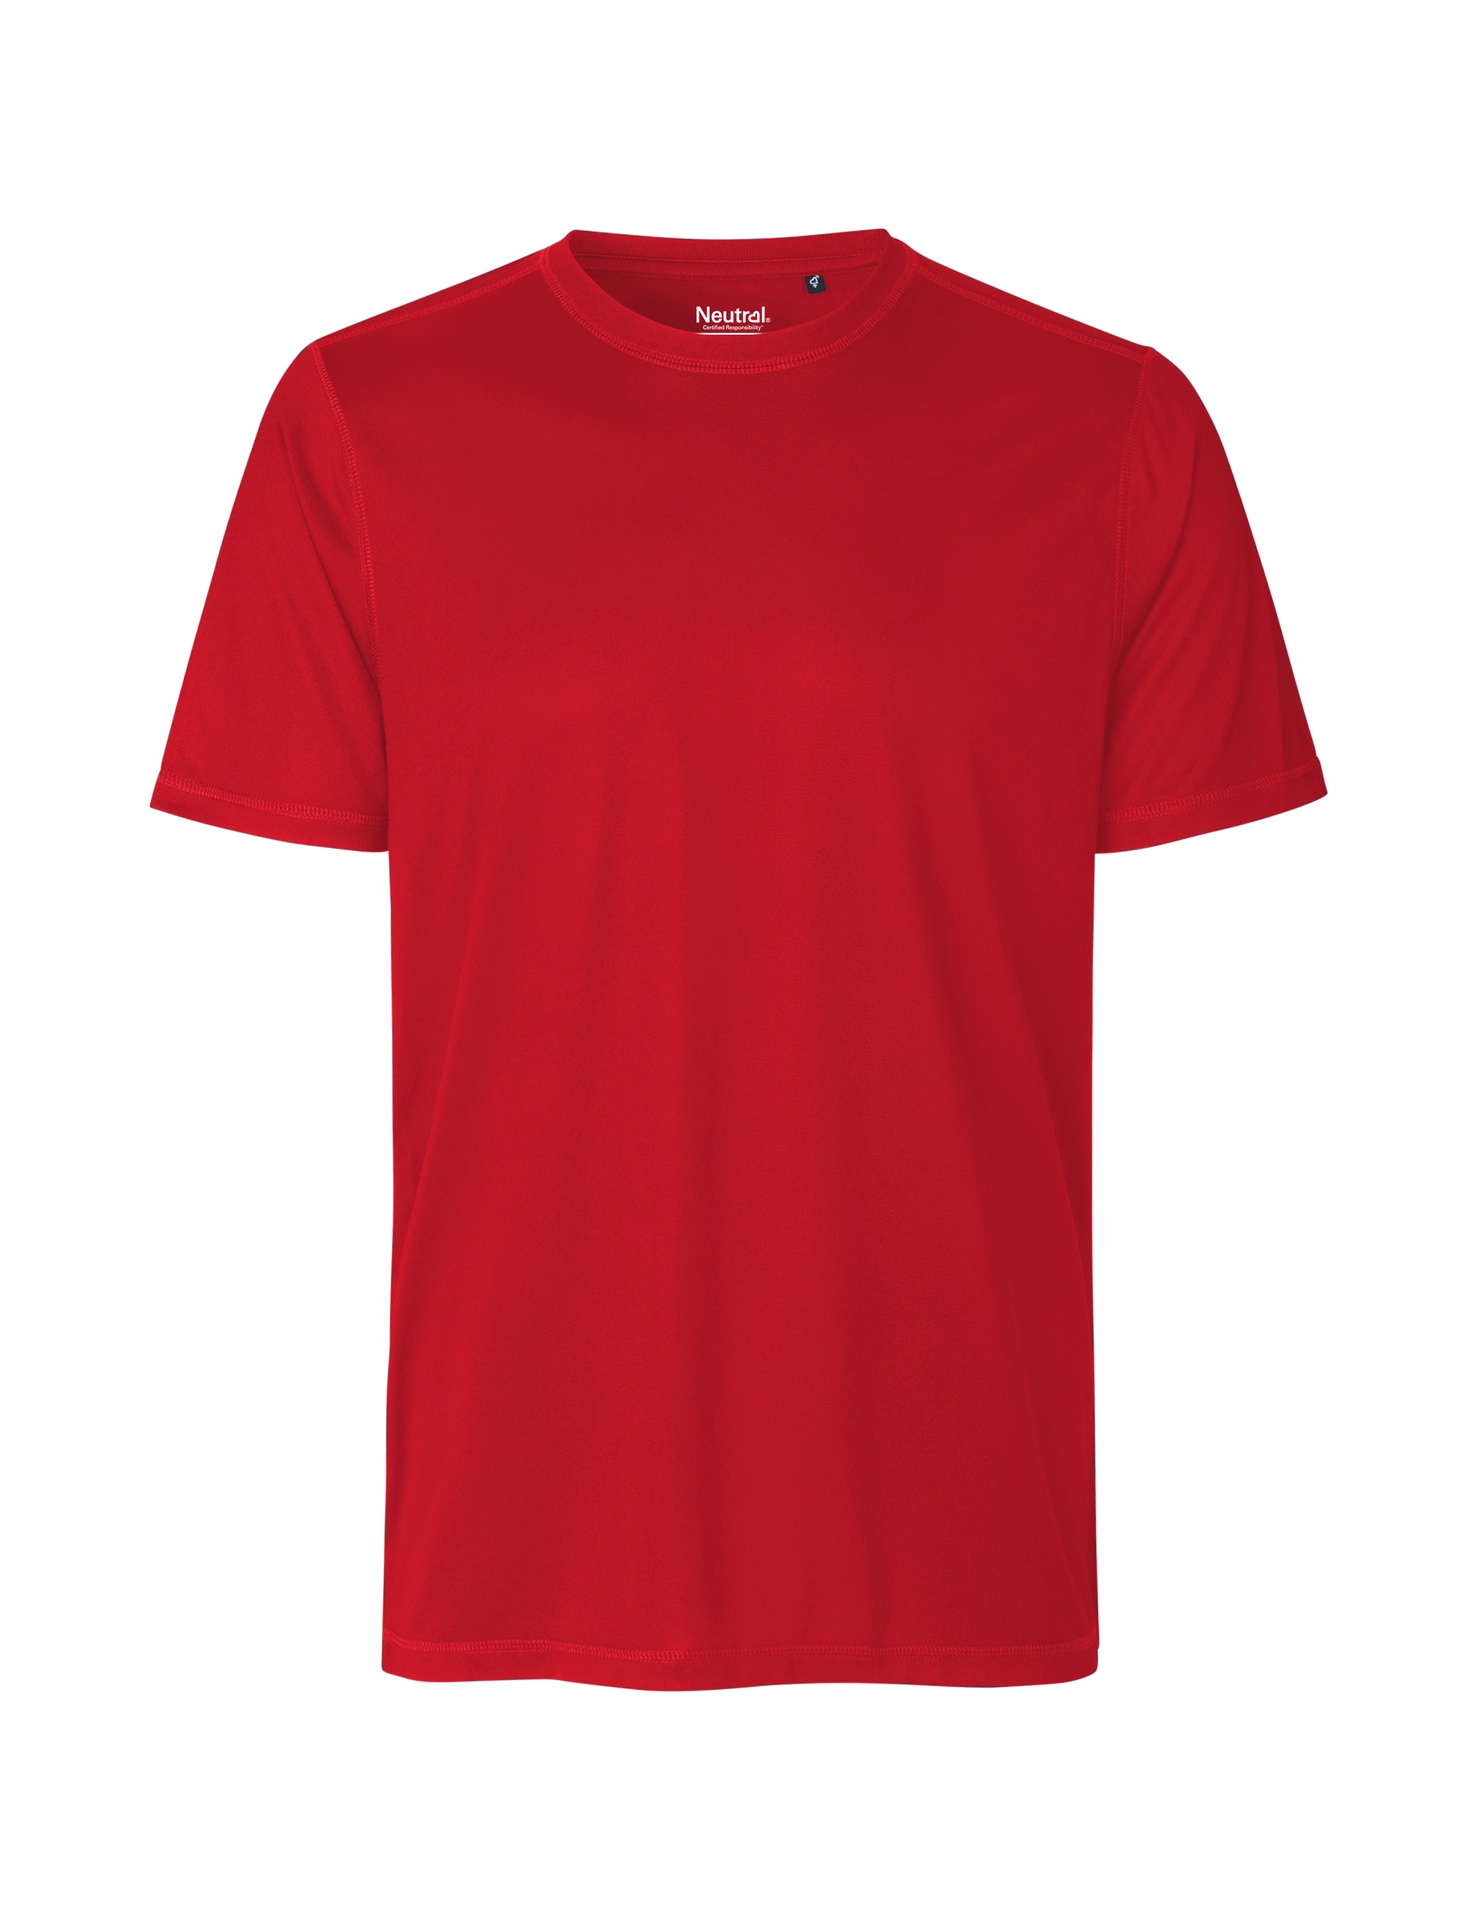 [PR/03769] Recycled Performance T-Shirt (Red 05, XL)